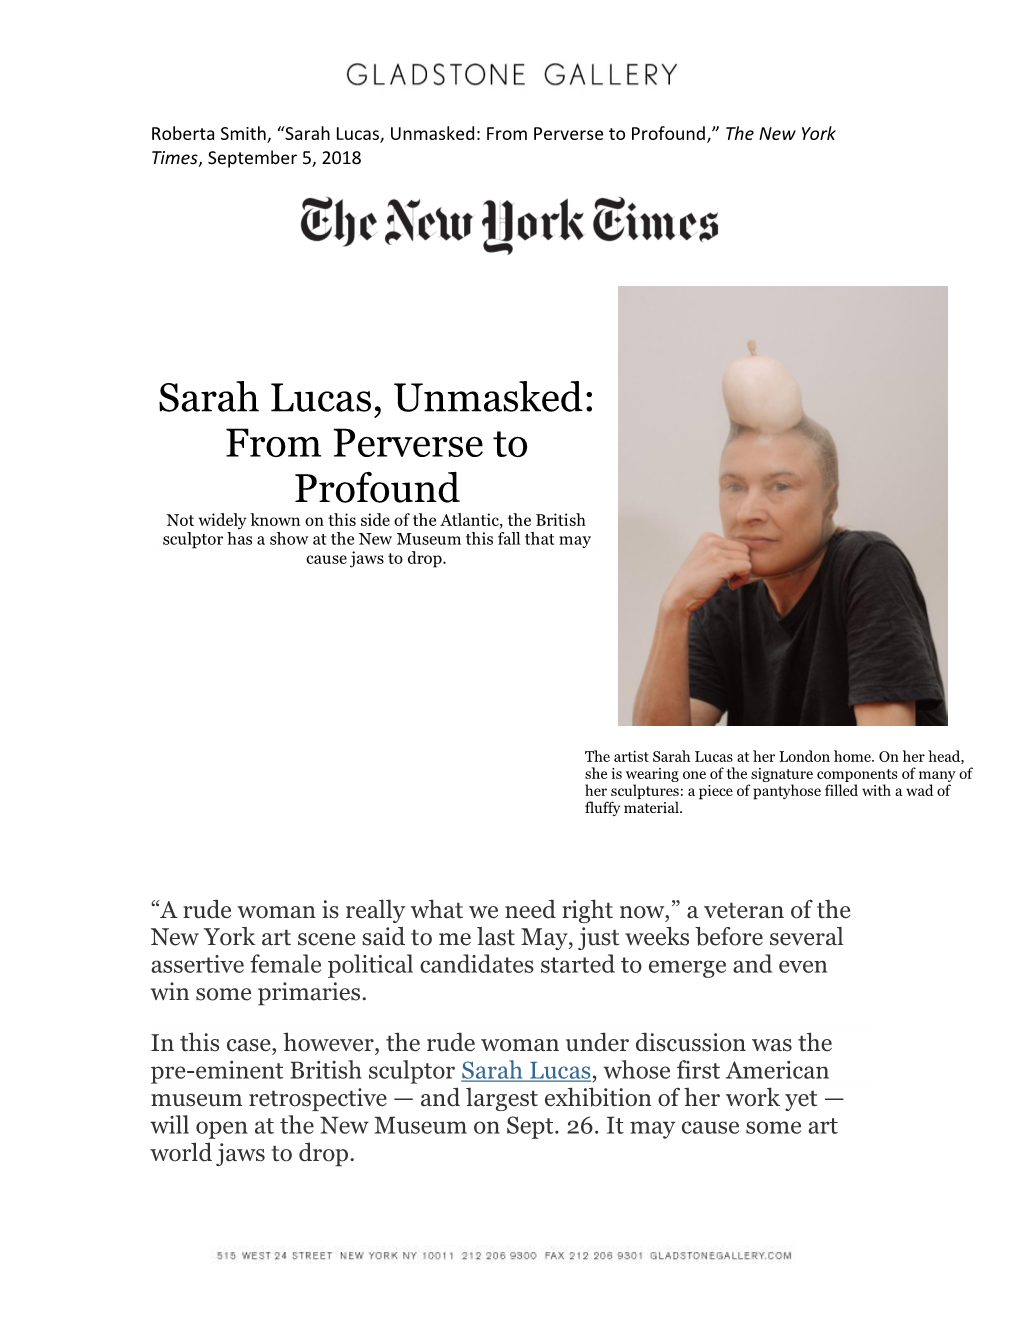 Sarah Lucas, Unmasked: from Perverse to Profound,” the New York Times, September 5, 2018